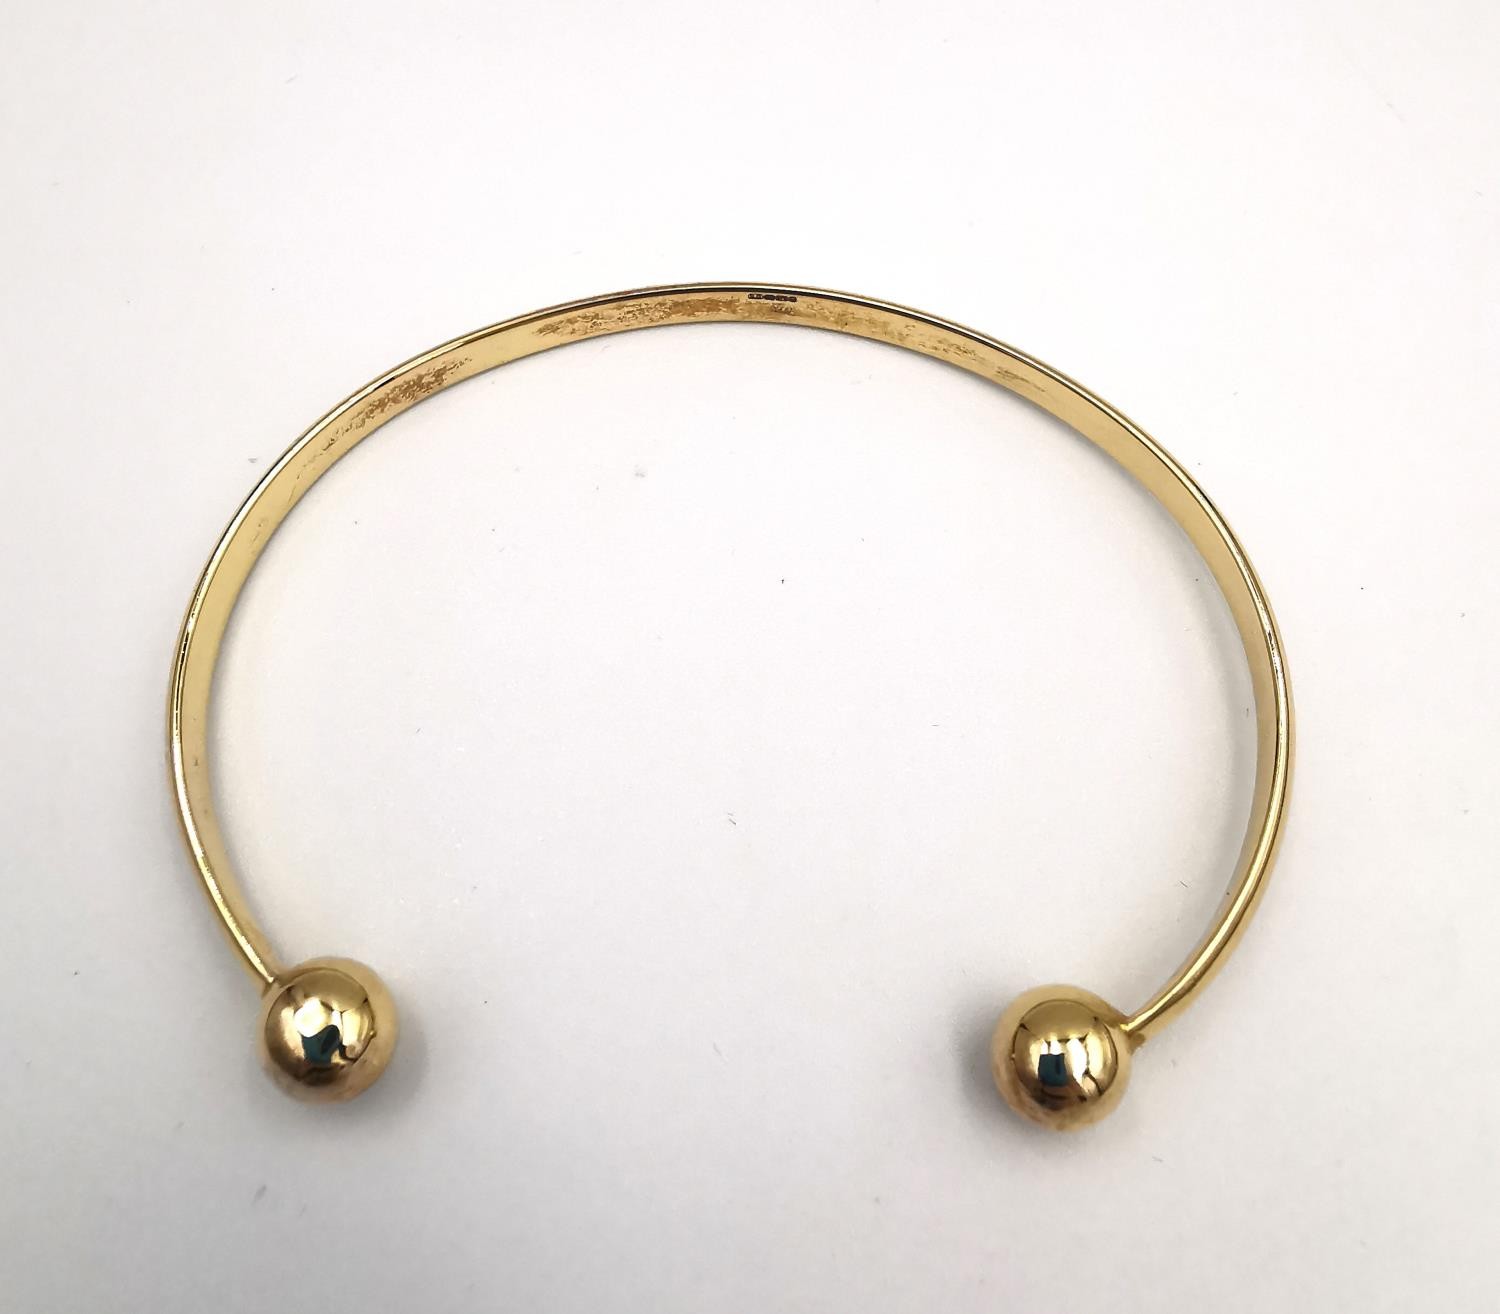 A 9ct yellow gold D-shaped bangle with ball ends. Hallmarked for 9ct. Weight.11.42g Dia.7cm - Image 4 of 6